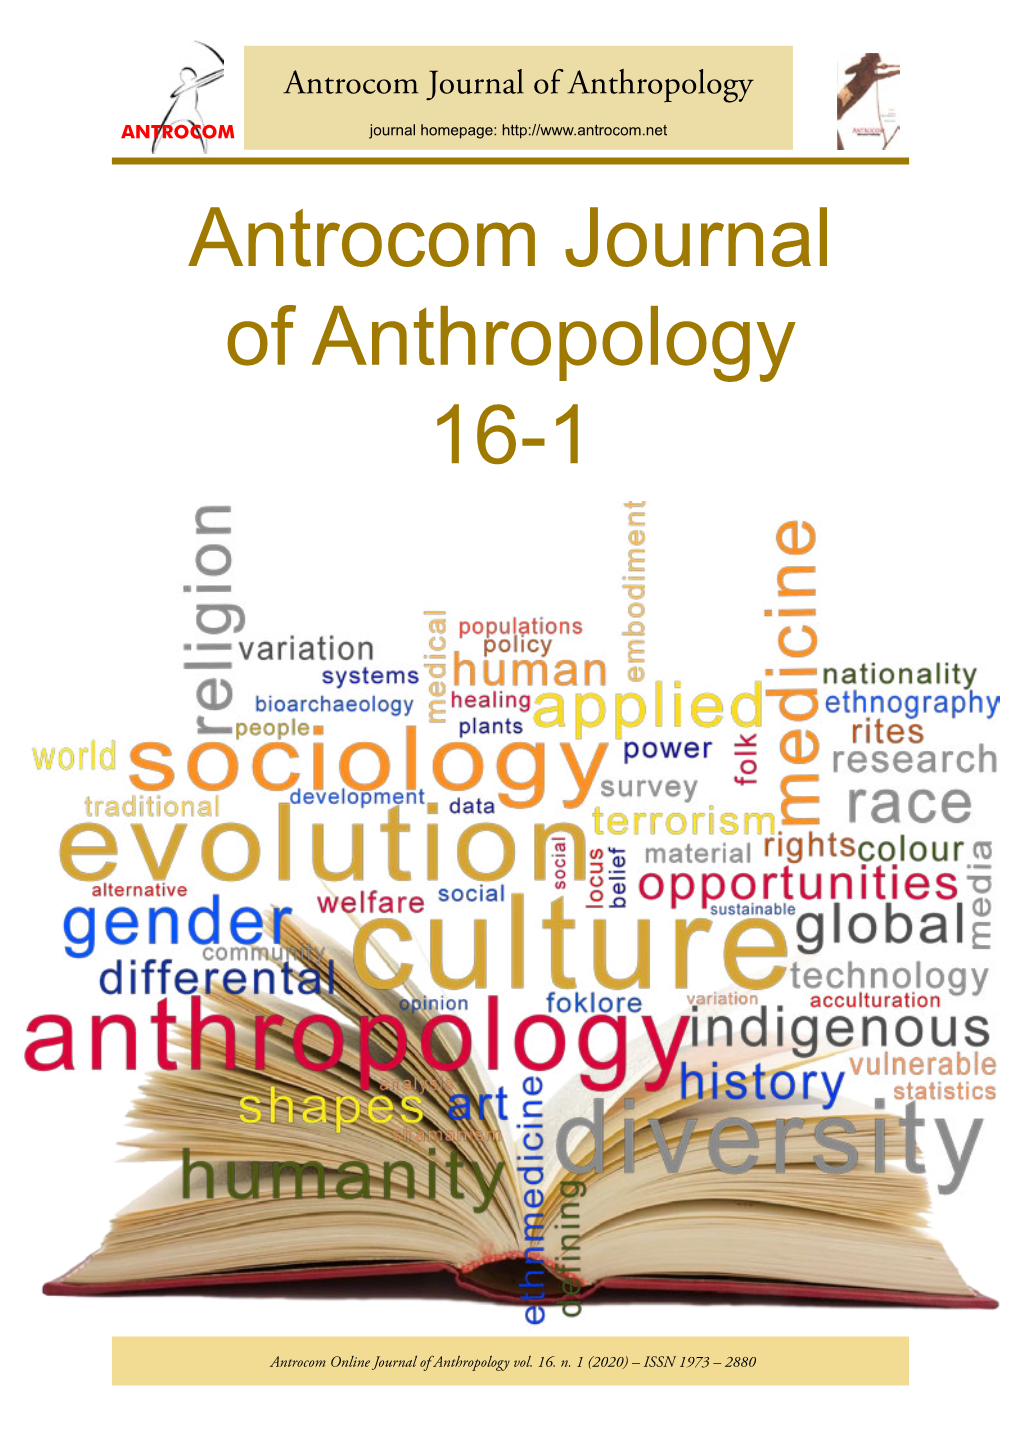 Antrocom Journal of Anthropology 16-1